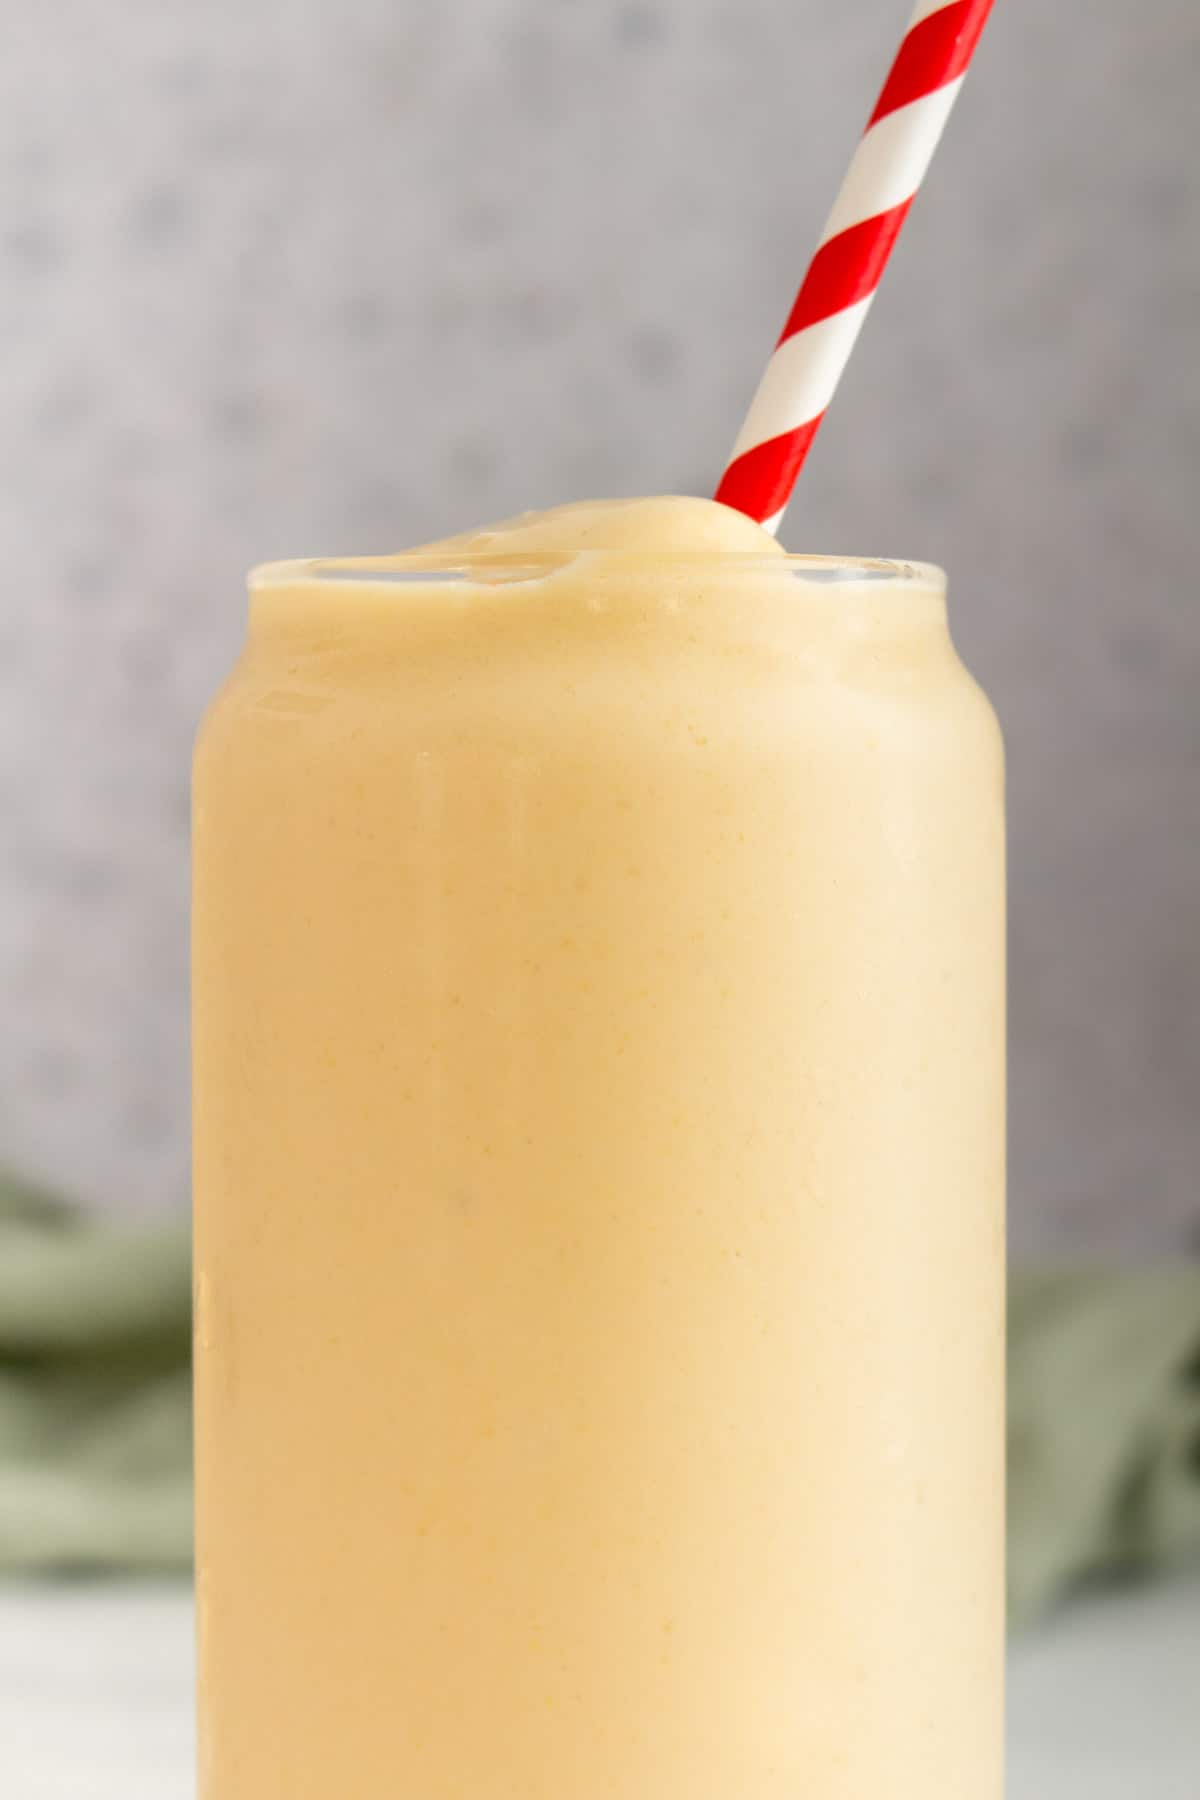 Close up of a glass of peach banana smoothie with a red and white striped straw.